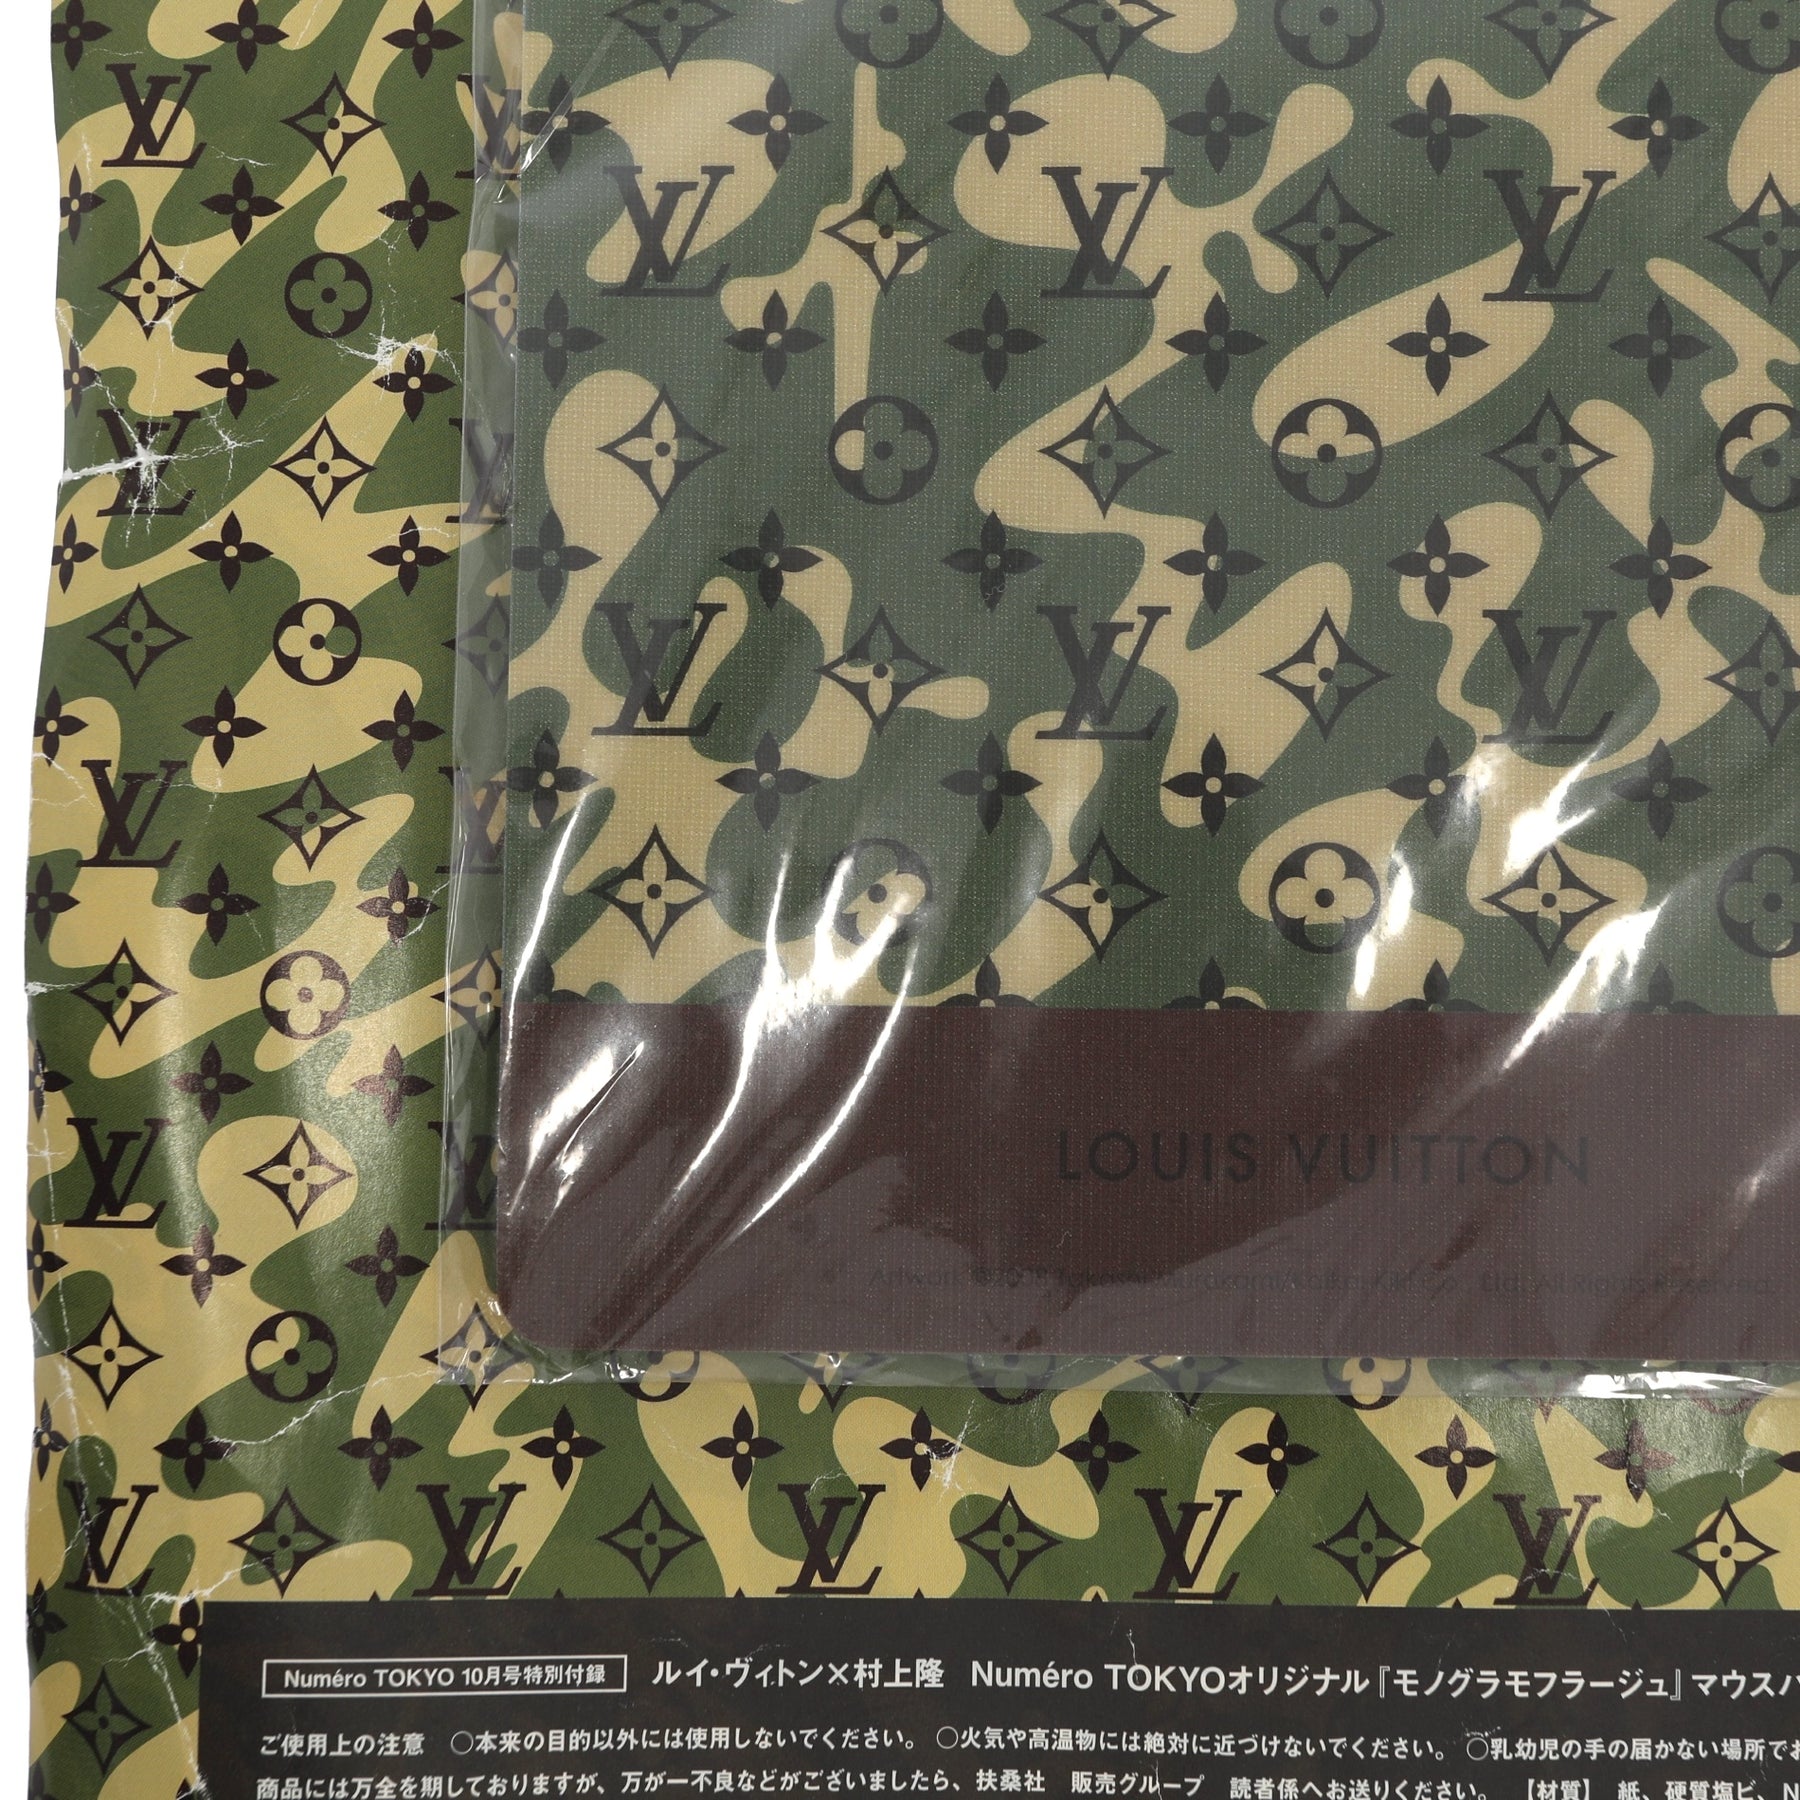 Limited Edition Louis Vuitton x Takashi Murakami Camo Mouse Pad – Fancy Lux